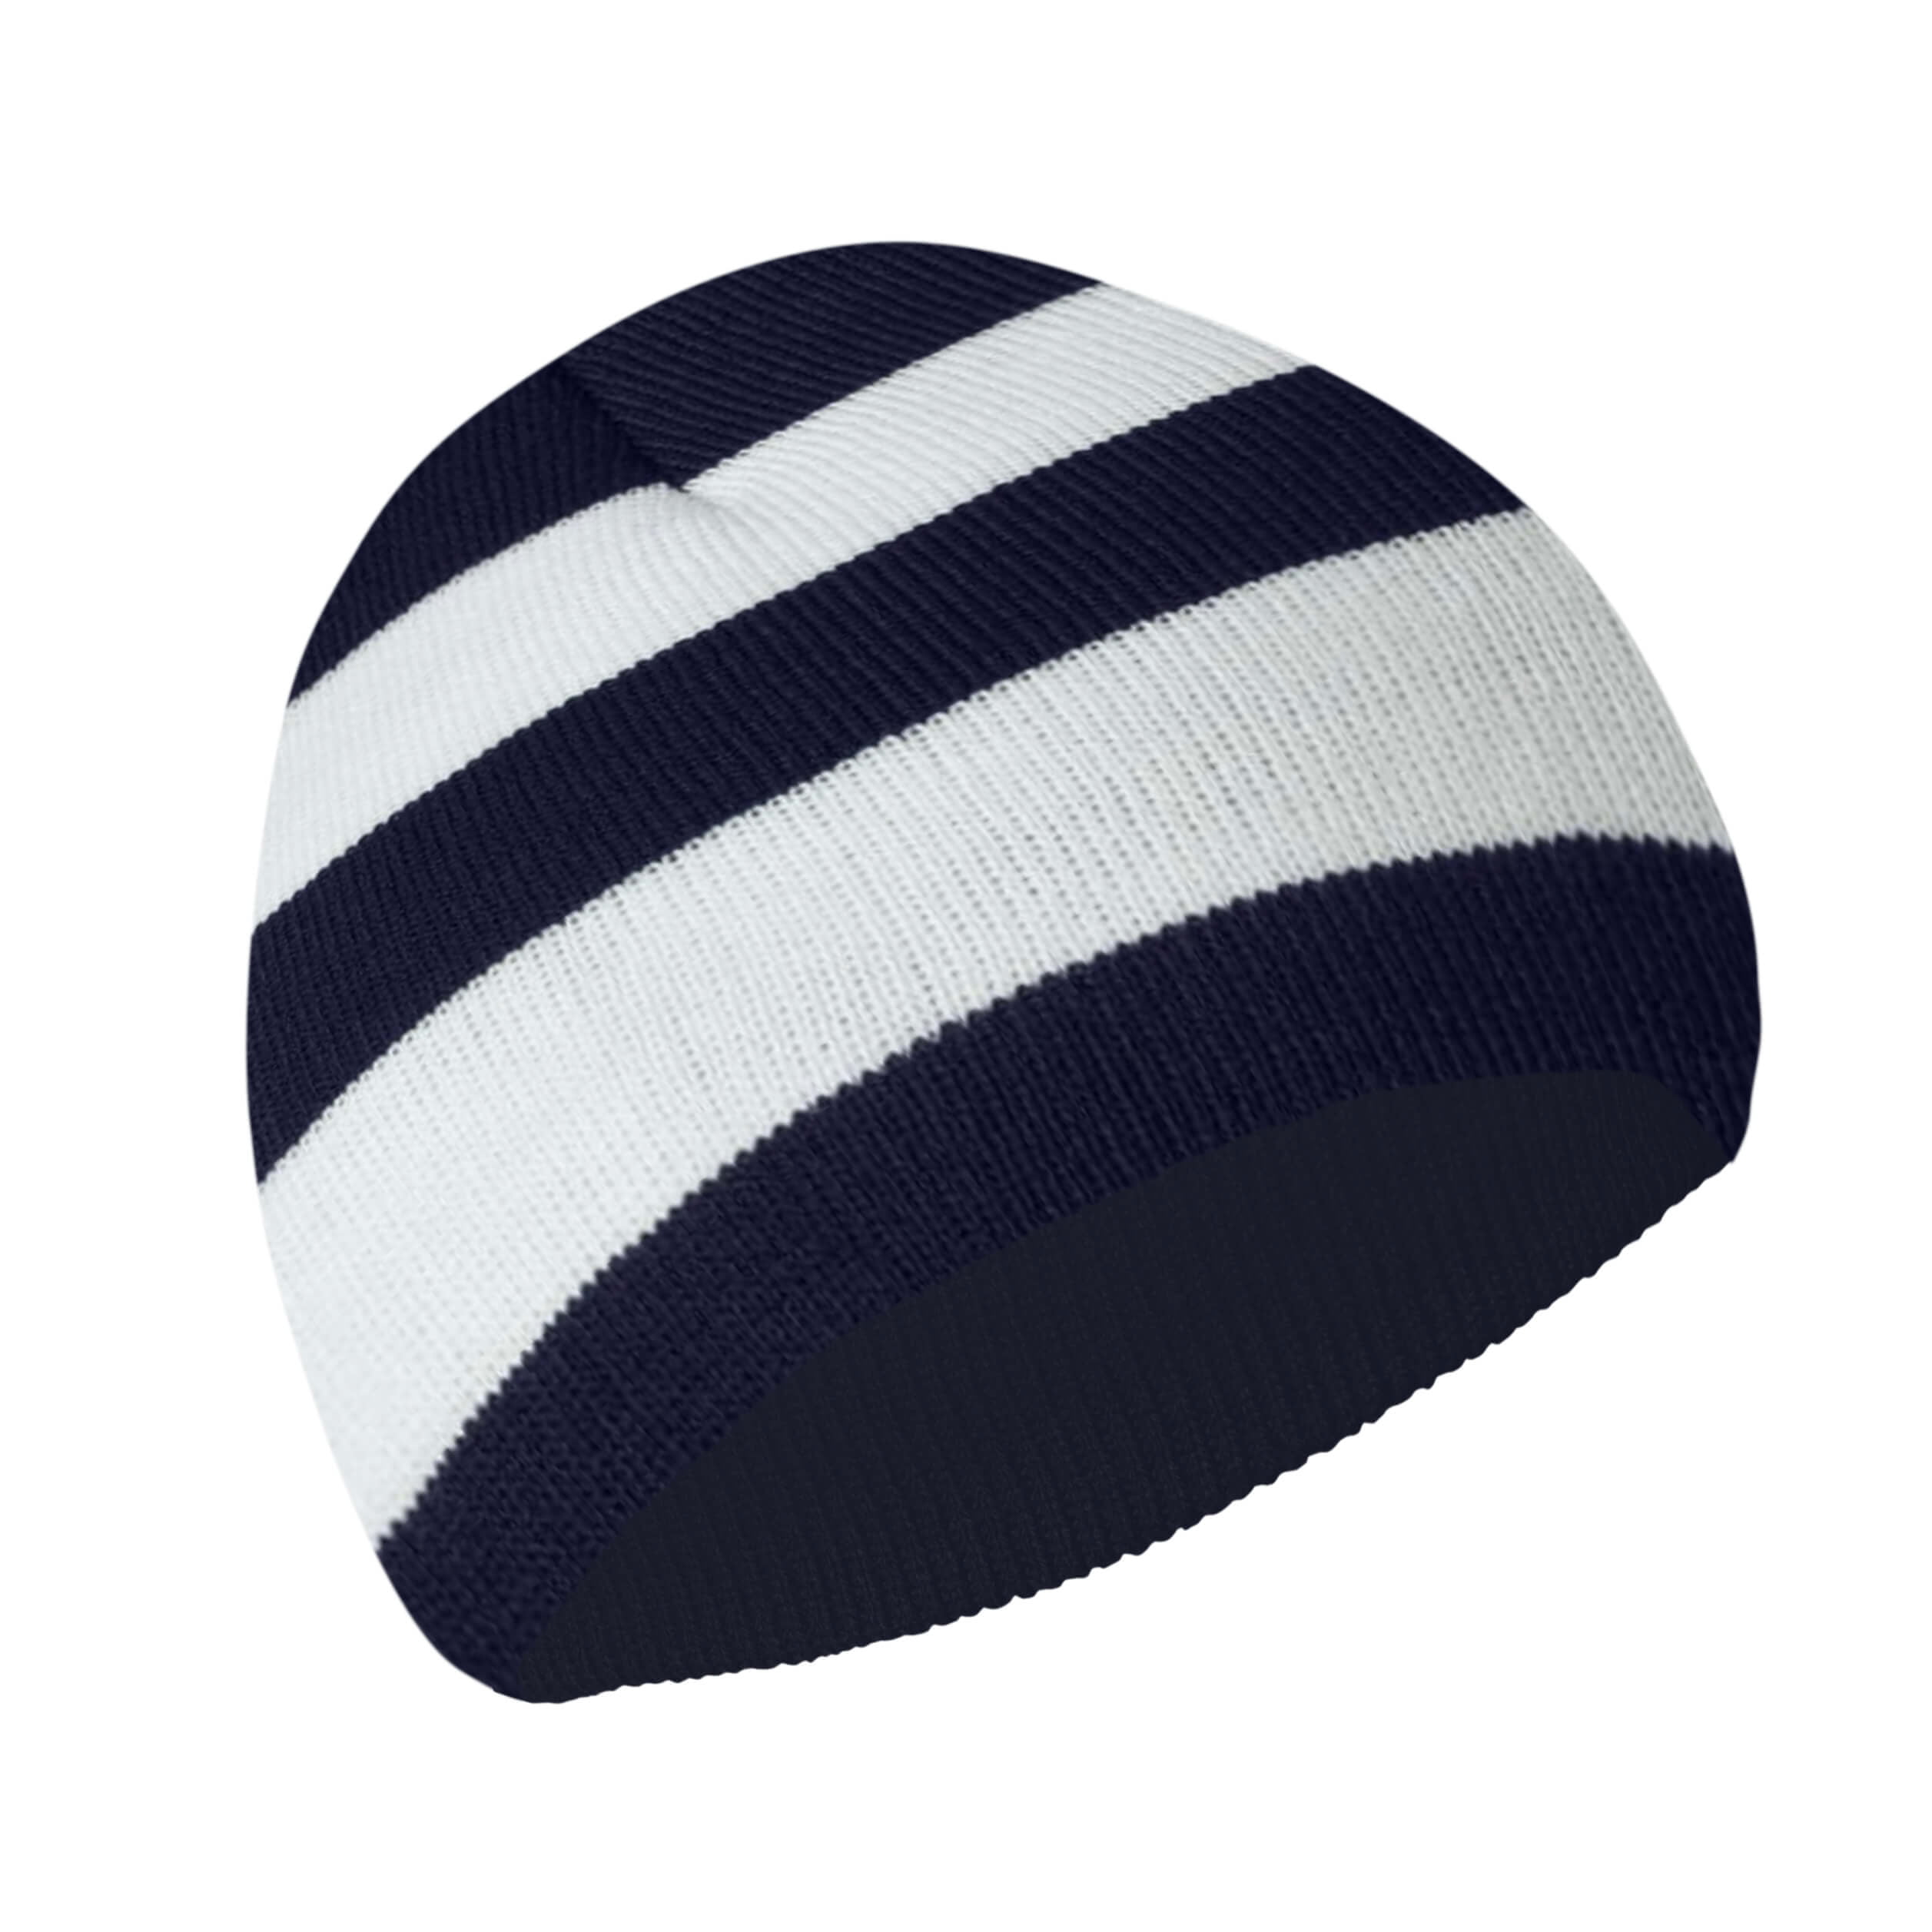 Mens Knitted Warm Thermal Striped Rim Winter Beanie Hat Black/Grey/Navy One Size 